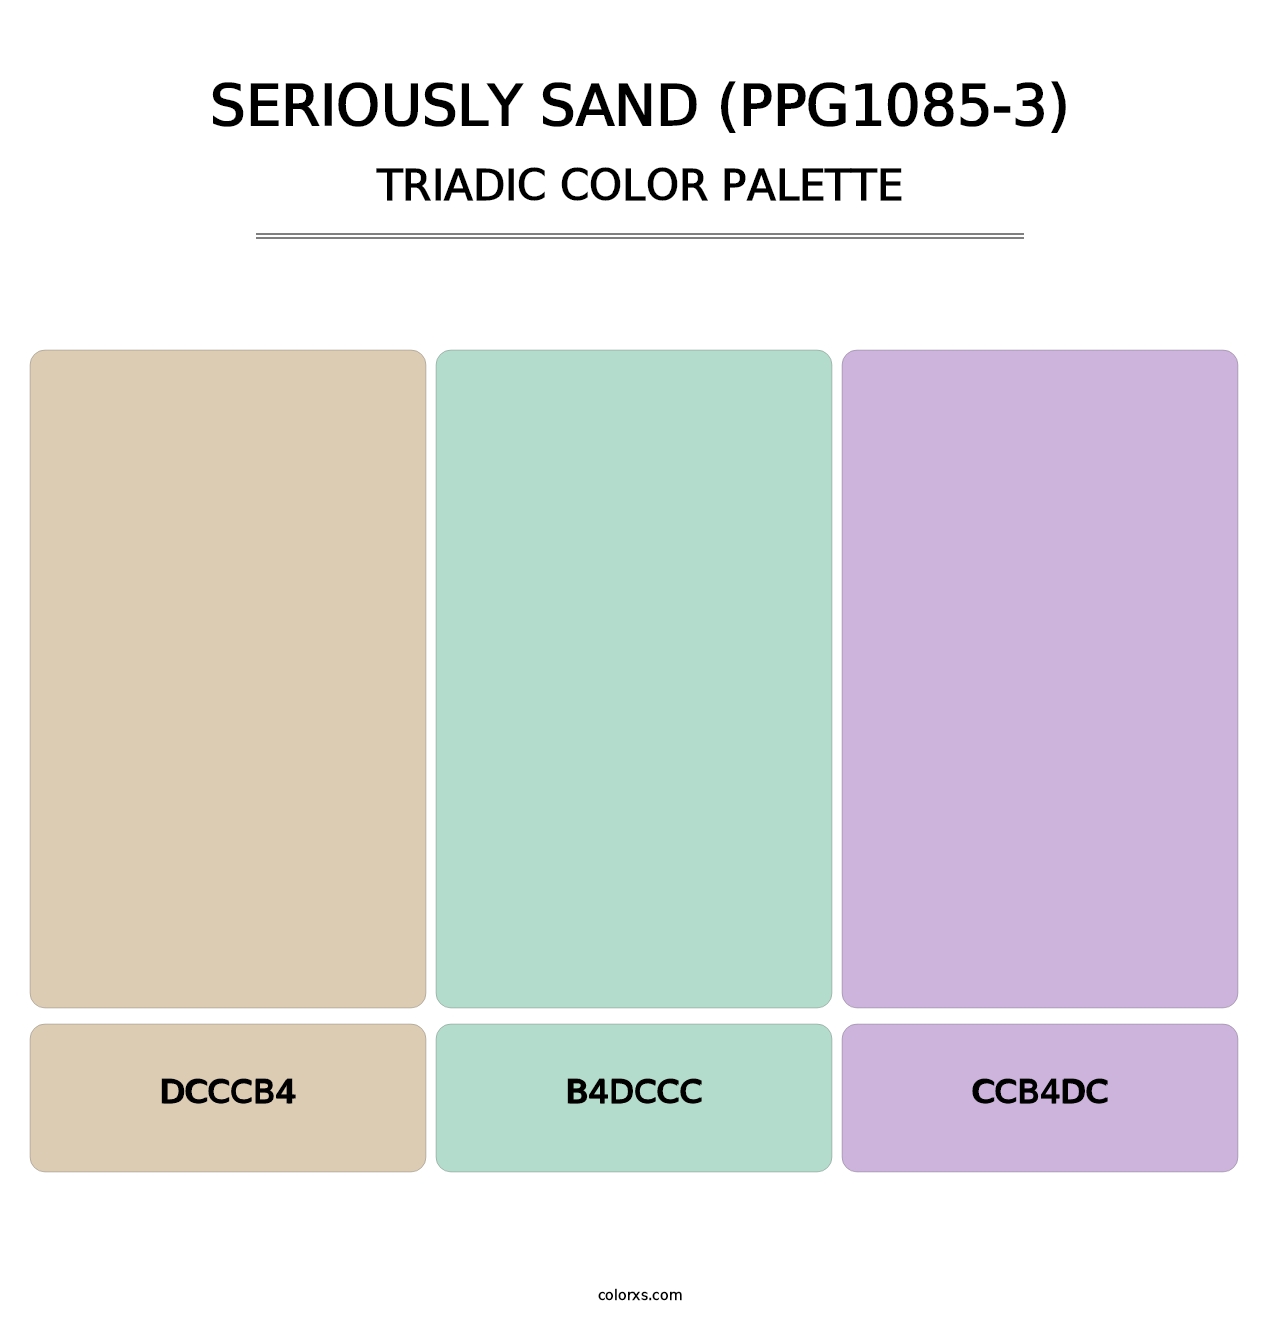 Seriously Sand (PPG1085-3) - Triadic Color Palette